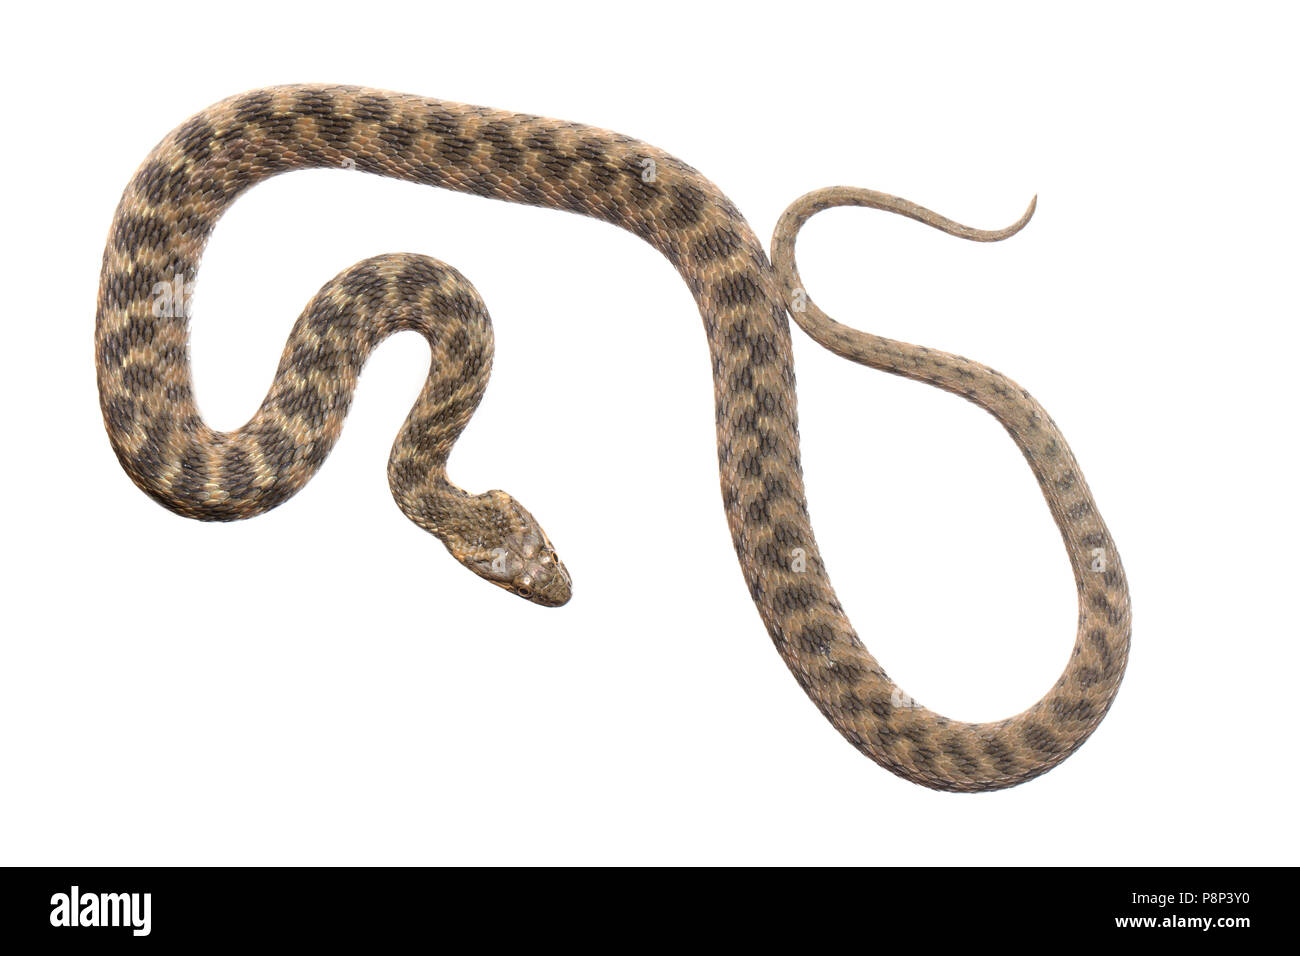 Viperine snake isolated against a white background Stock Photo